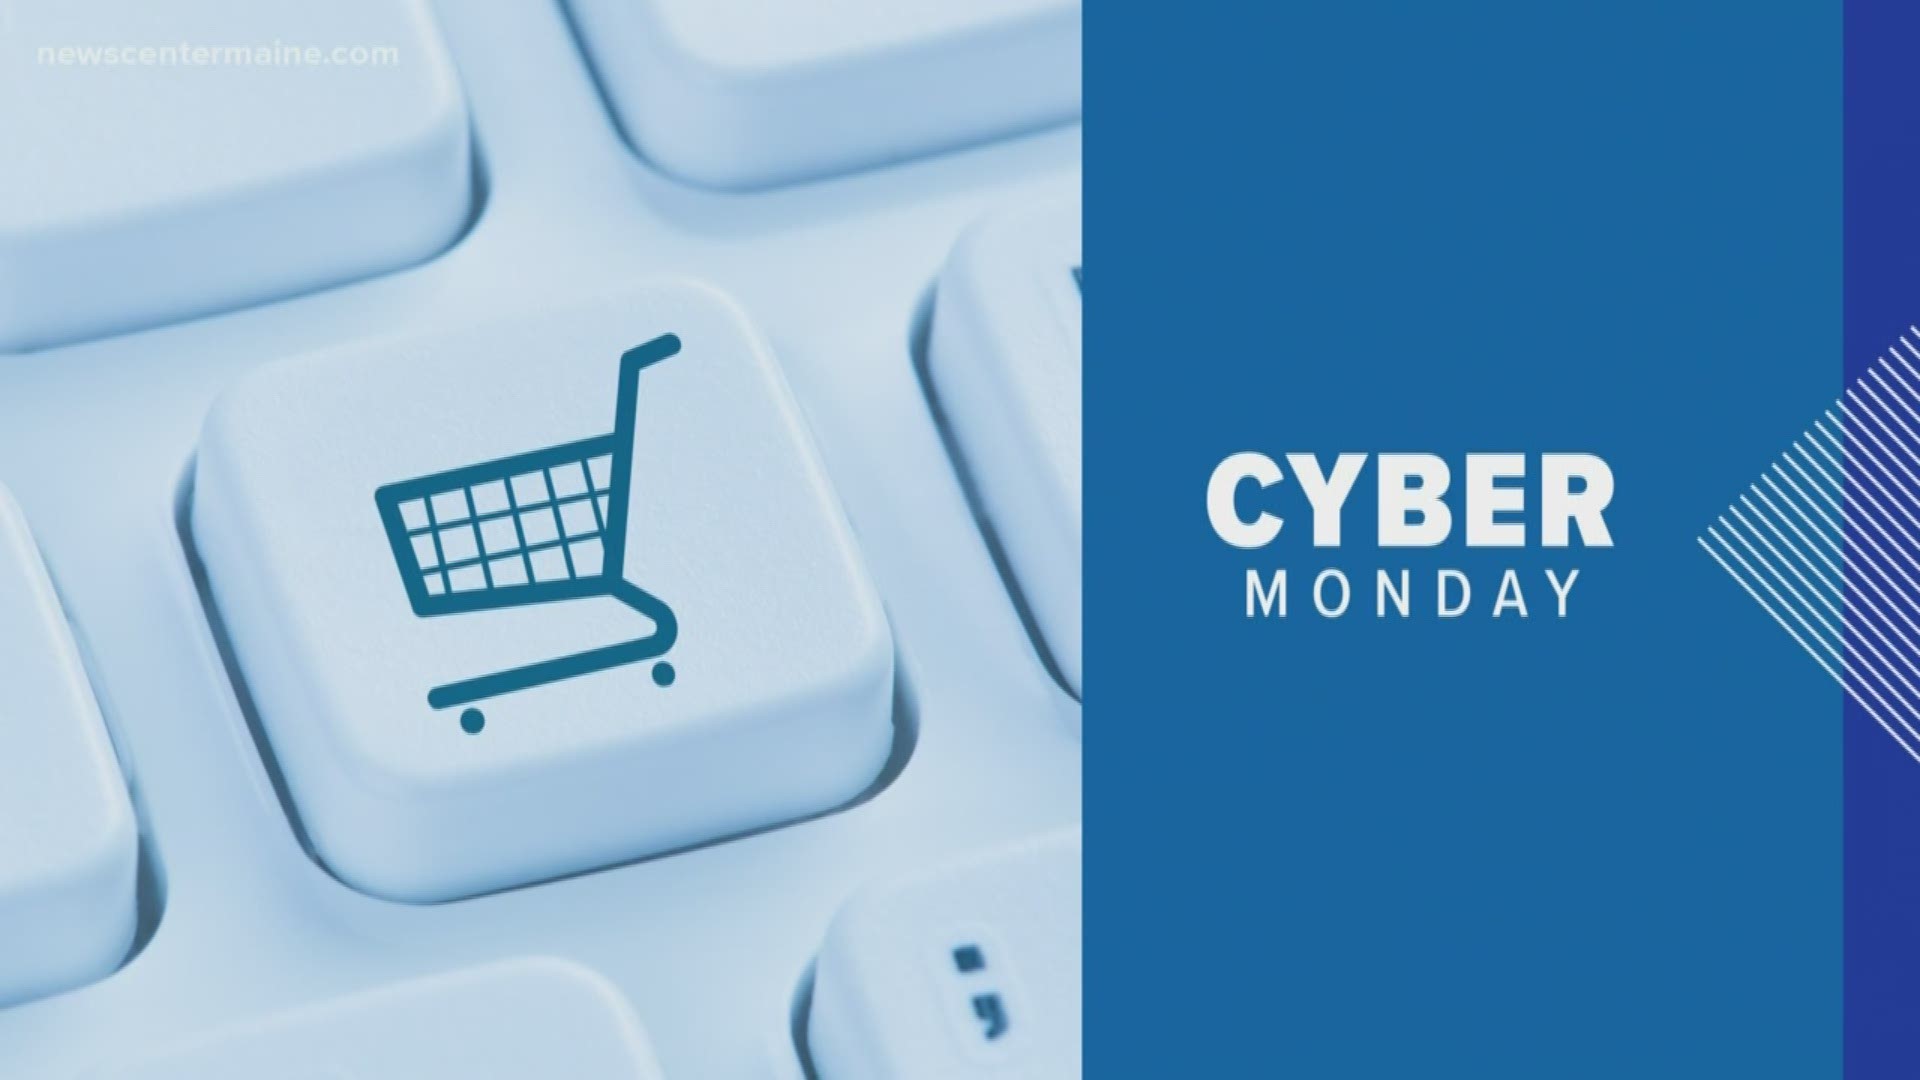 Beware of payment scams this Cyber Monday.